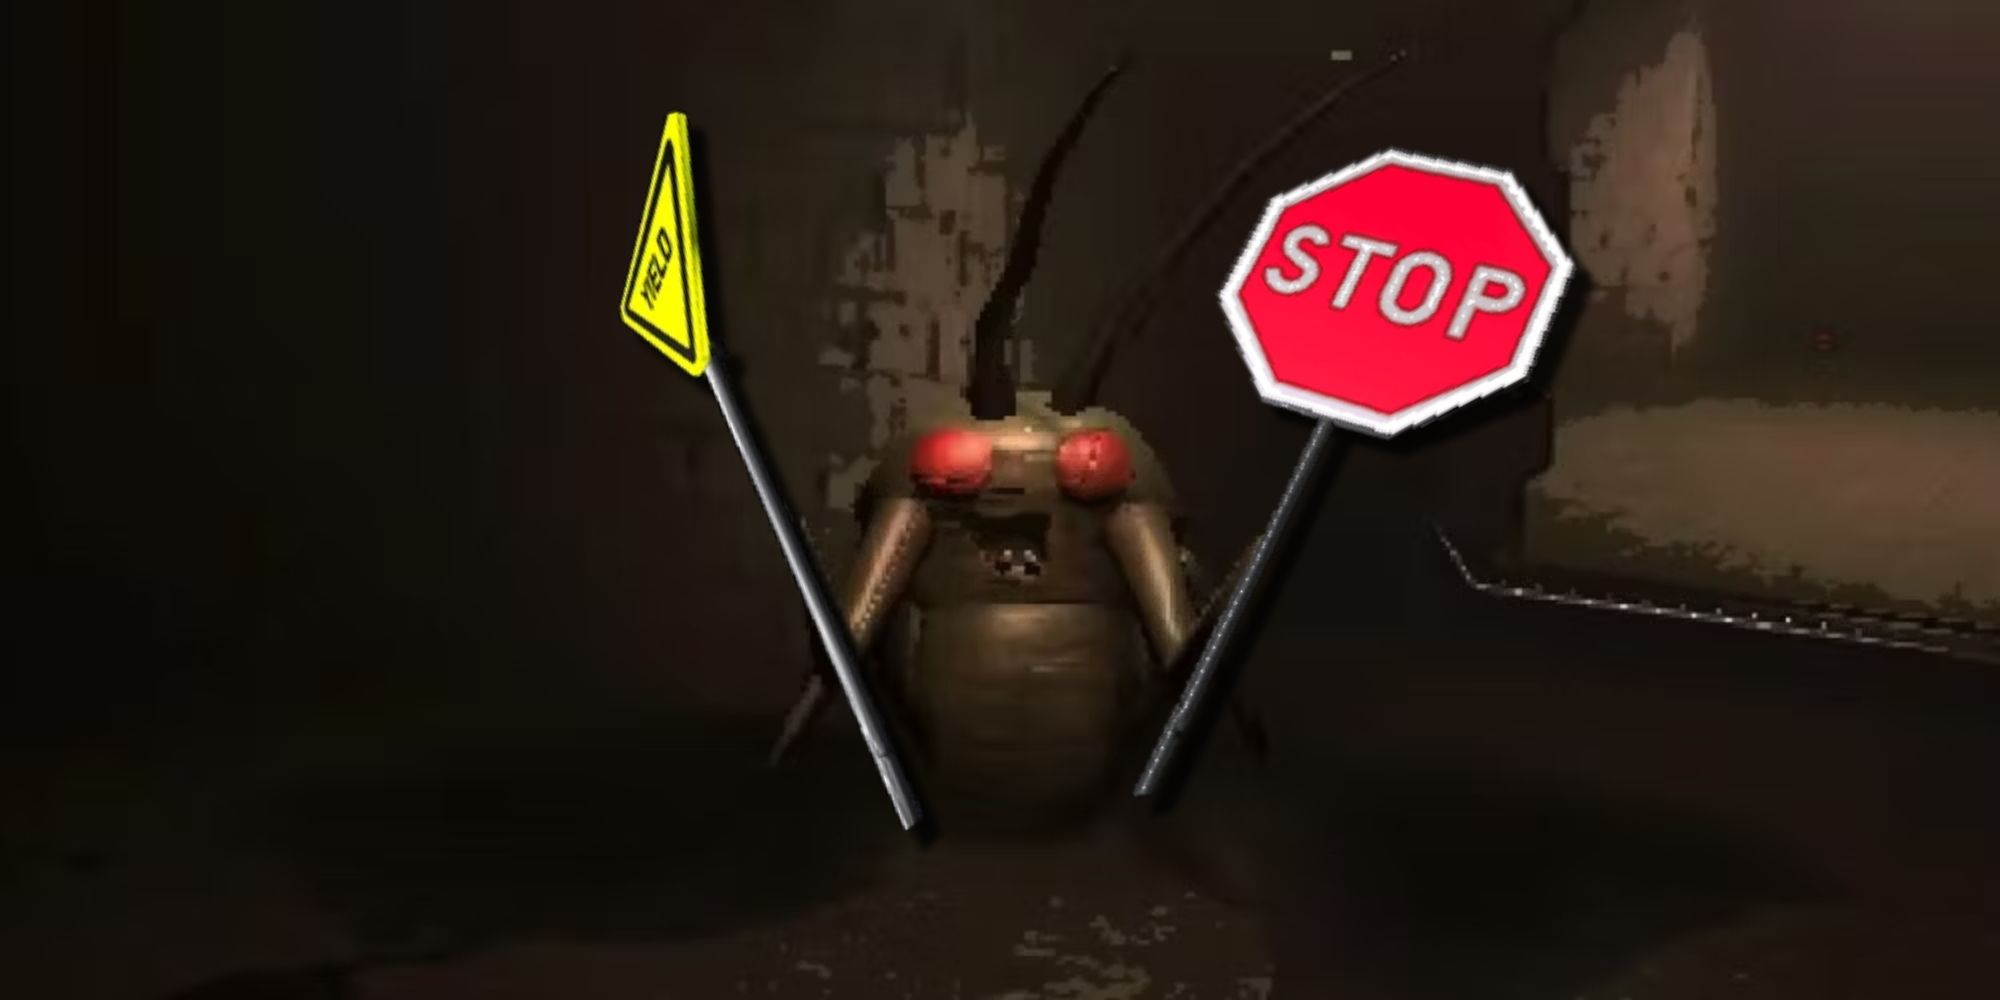 A Hoarding Bug holding a stop sign in one hand and a yield sign in the other, two weapons that can be used against enemies